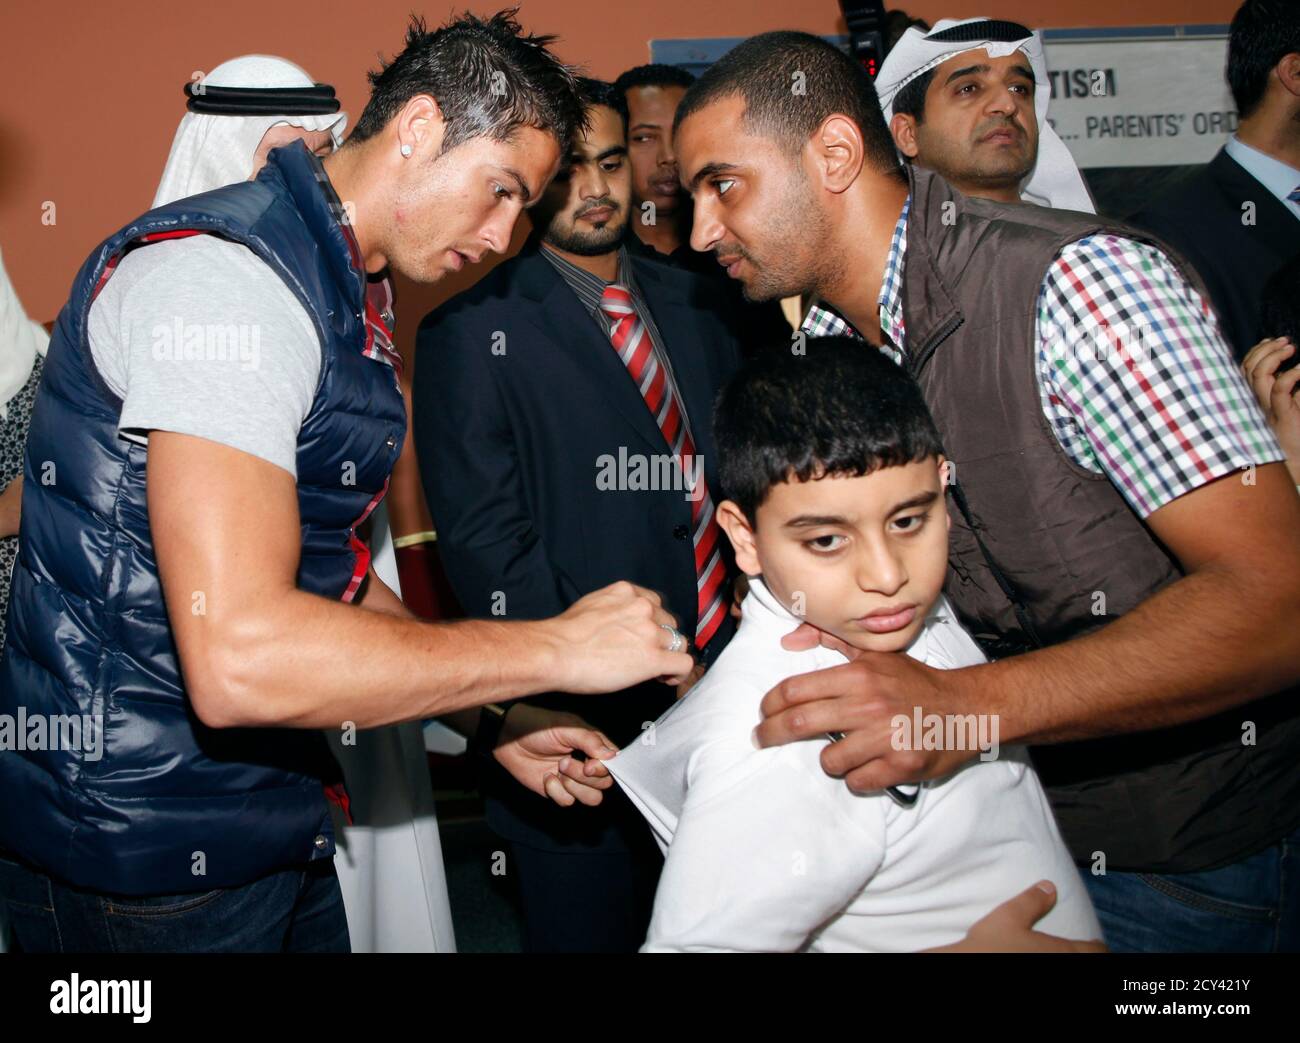 Real Madrid's Cristiano Ronaldo (L) sings an autistic boy's t-shirt during  his visit to the Autism centre in Dubai December 28, 2011. REUTERS/Ahmed  Jadallah (UNITED ARAB EMIRATES - Tags: SPORT ENTERTAINMENT Stock